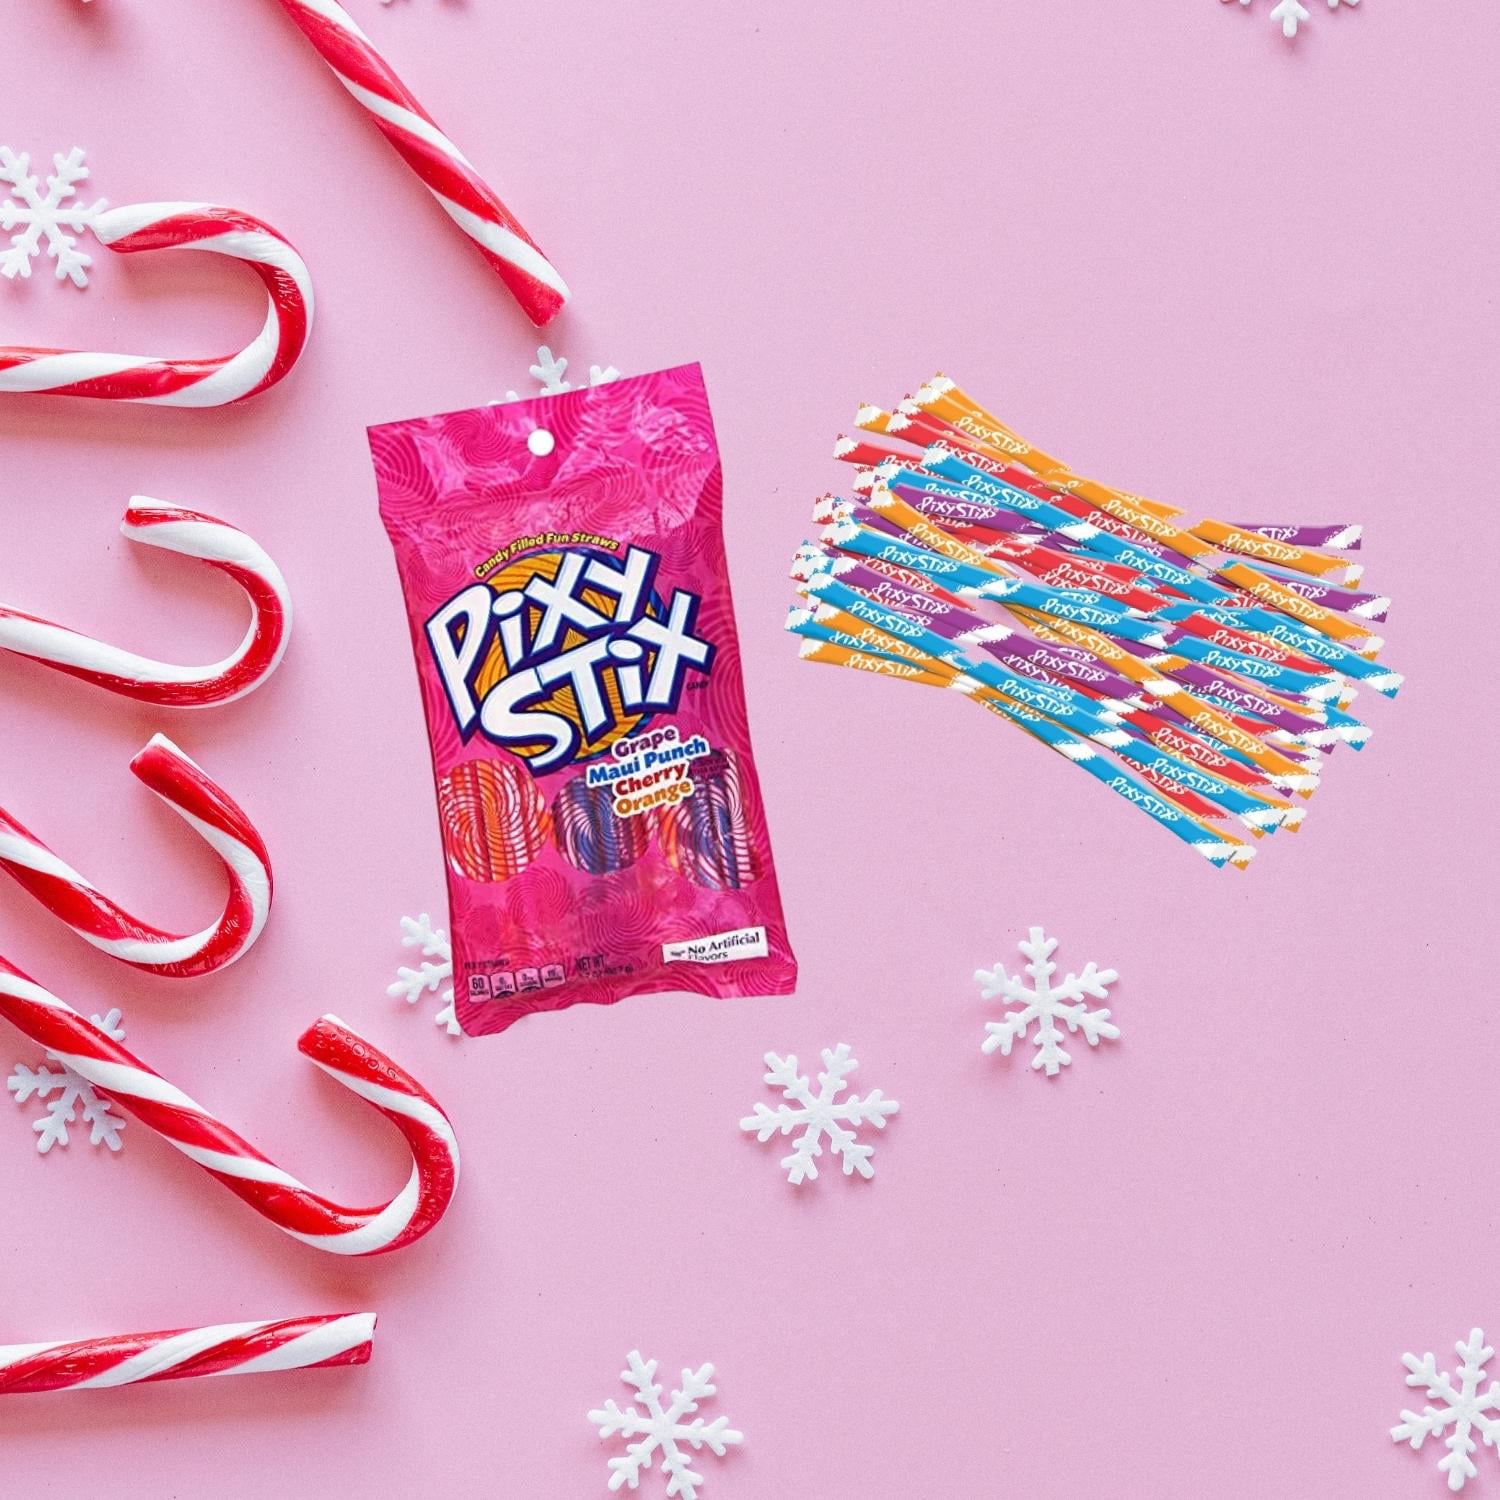 Pixy Stix Candy Filled Fun Straws - Bulk Candy - 3 Pounds - Aprox. 600  Sticks - Wonka Pixy Sticks - Bulk Pixy Sticks, Assorted Flavors, Party Bag  Family Size 3 Pound (Pack of 1)